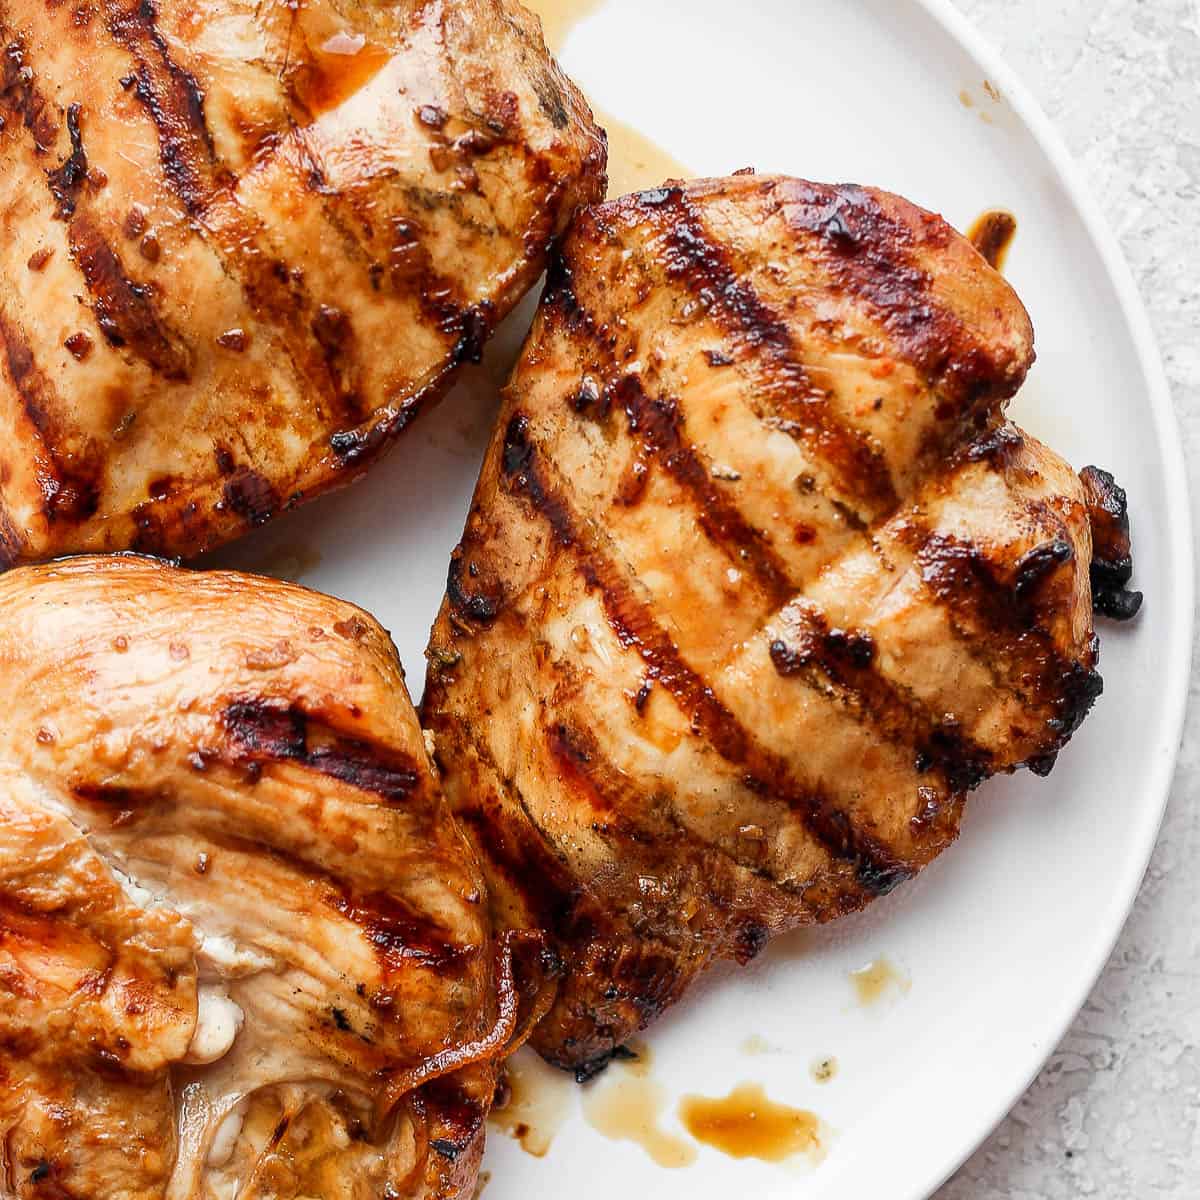 Tips For Grilling Chicken Breast on Charcoal Grill